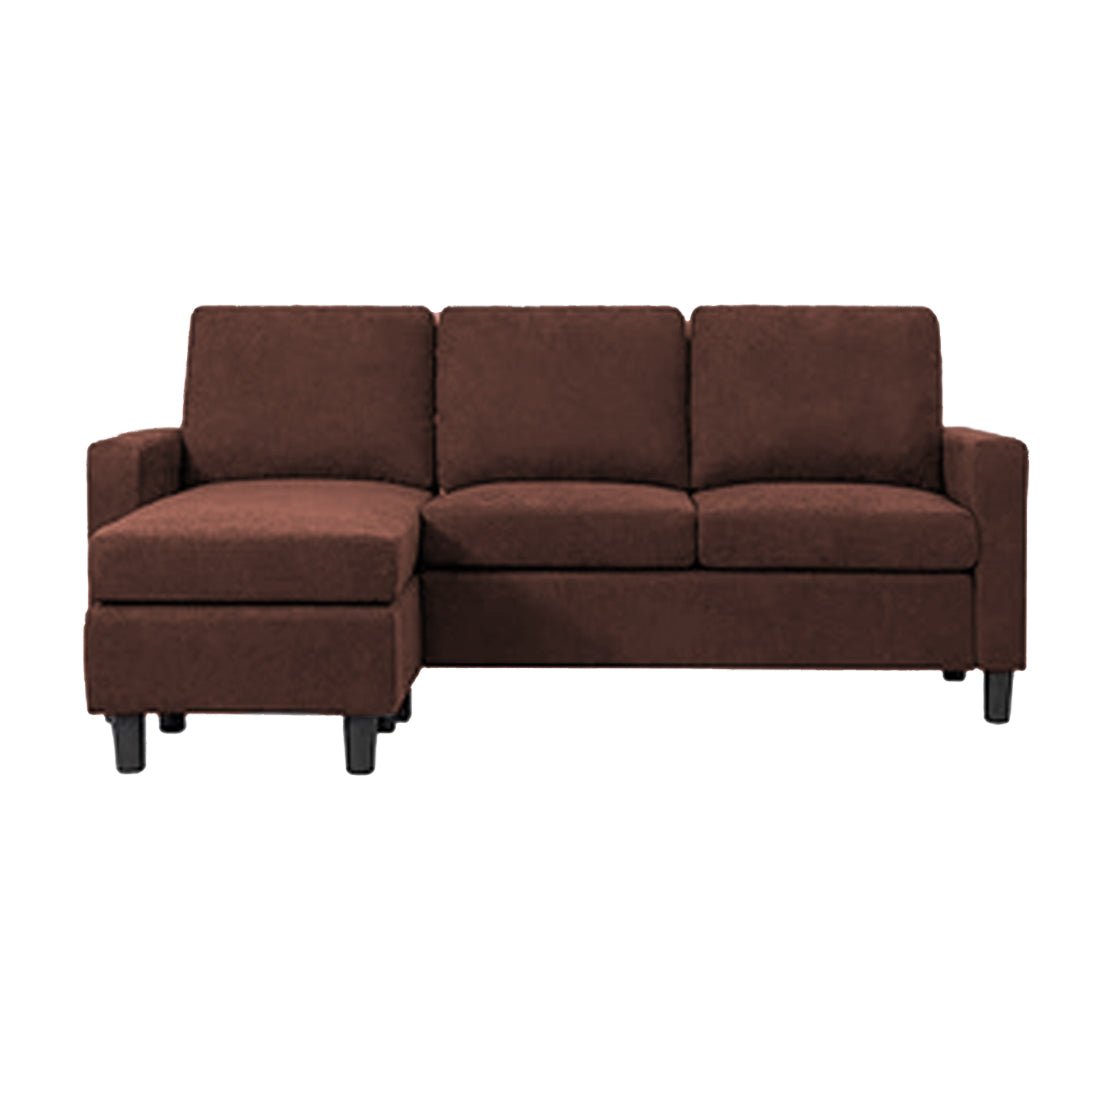 Torque India Swan 3 Seater L Shape Sofa With Ottoman For Living Room - Torque India